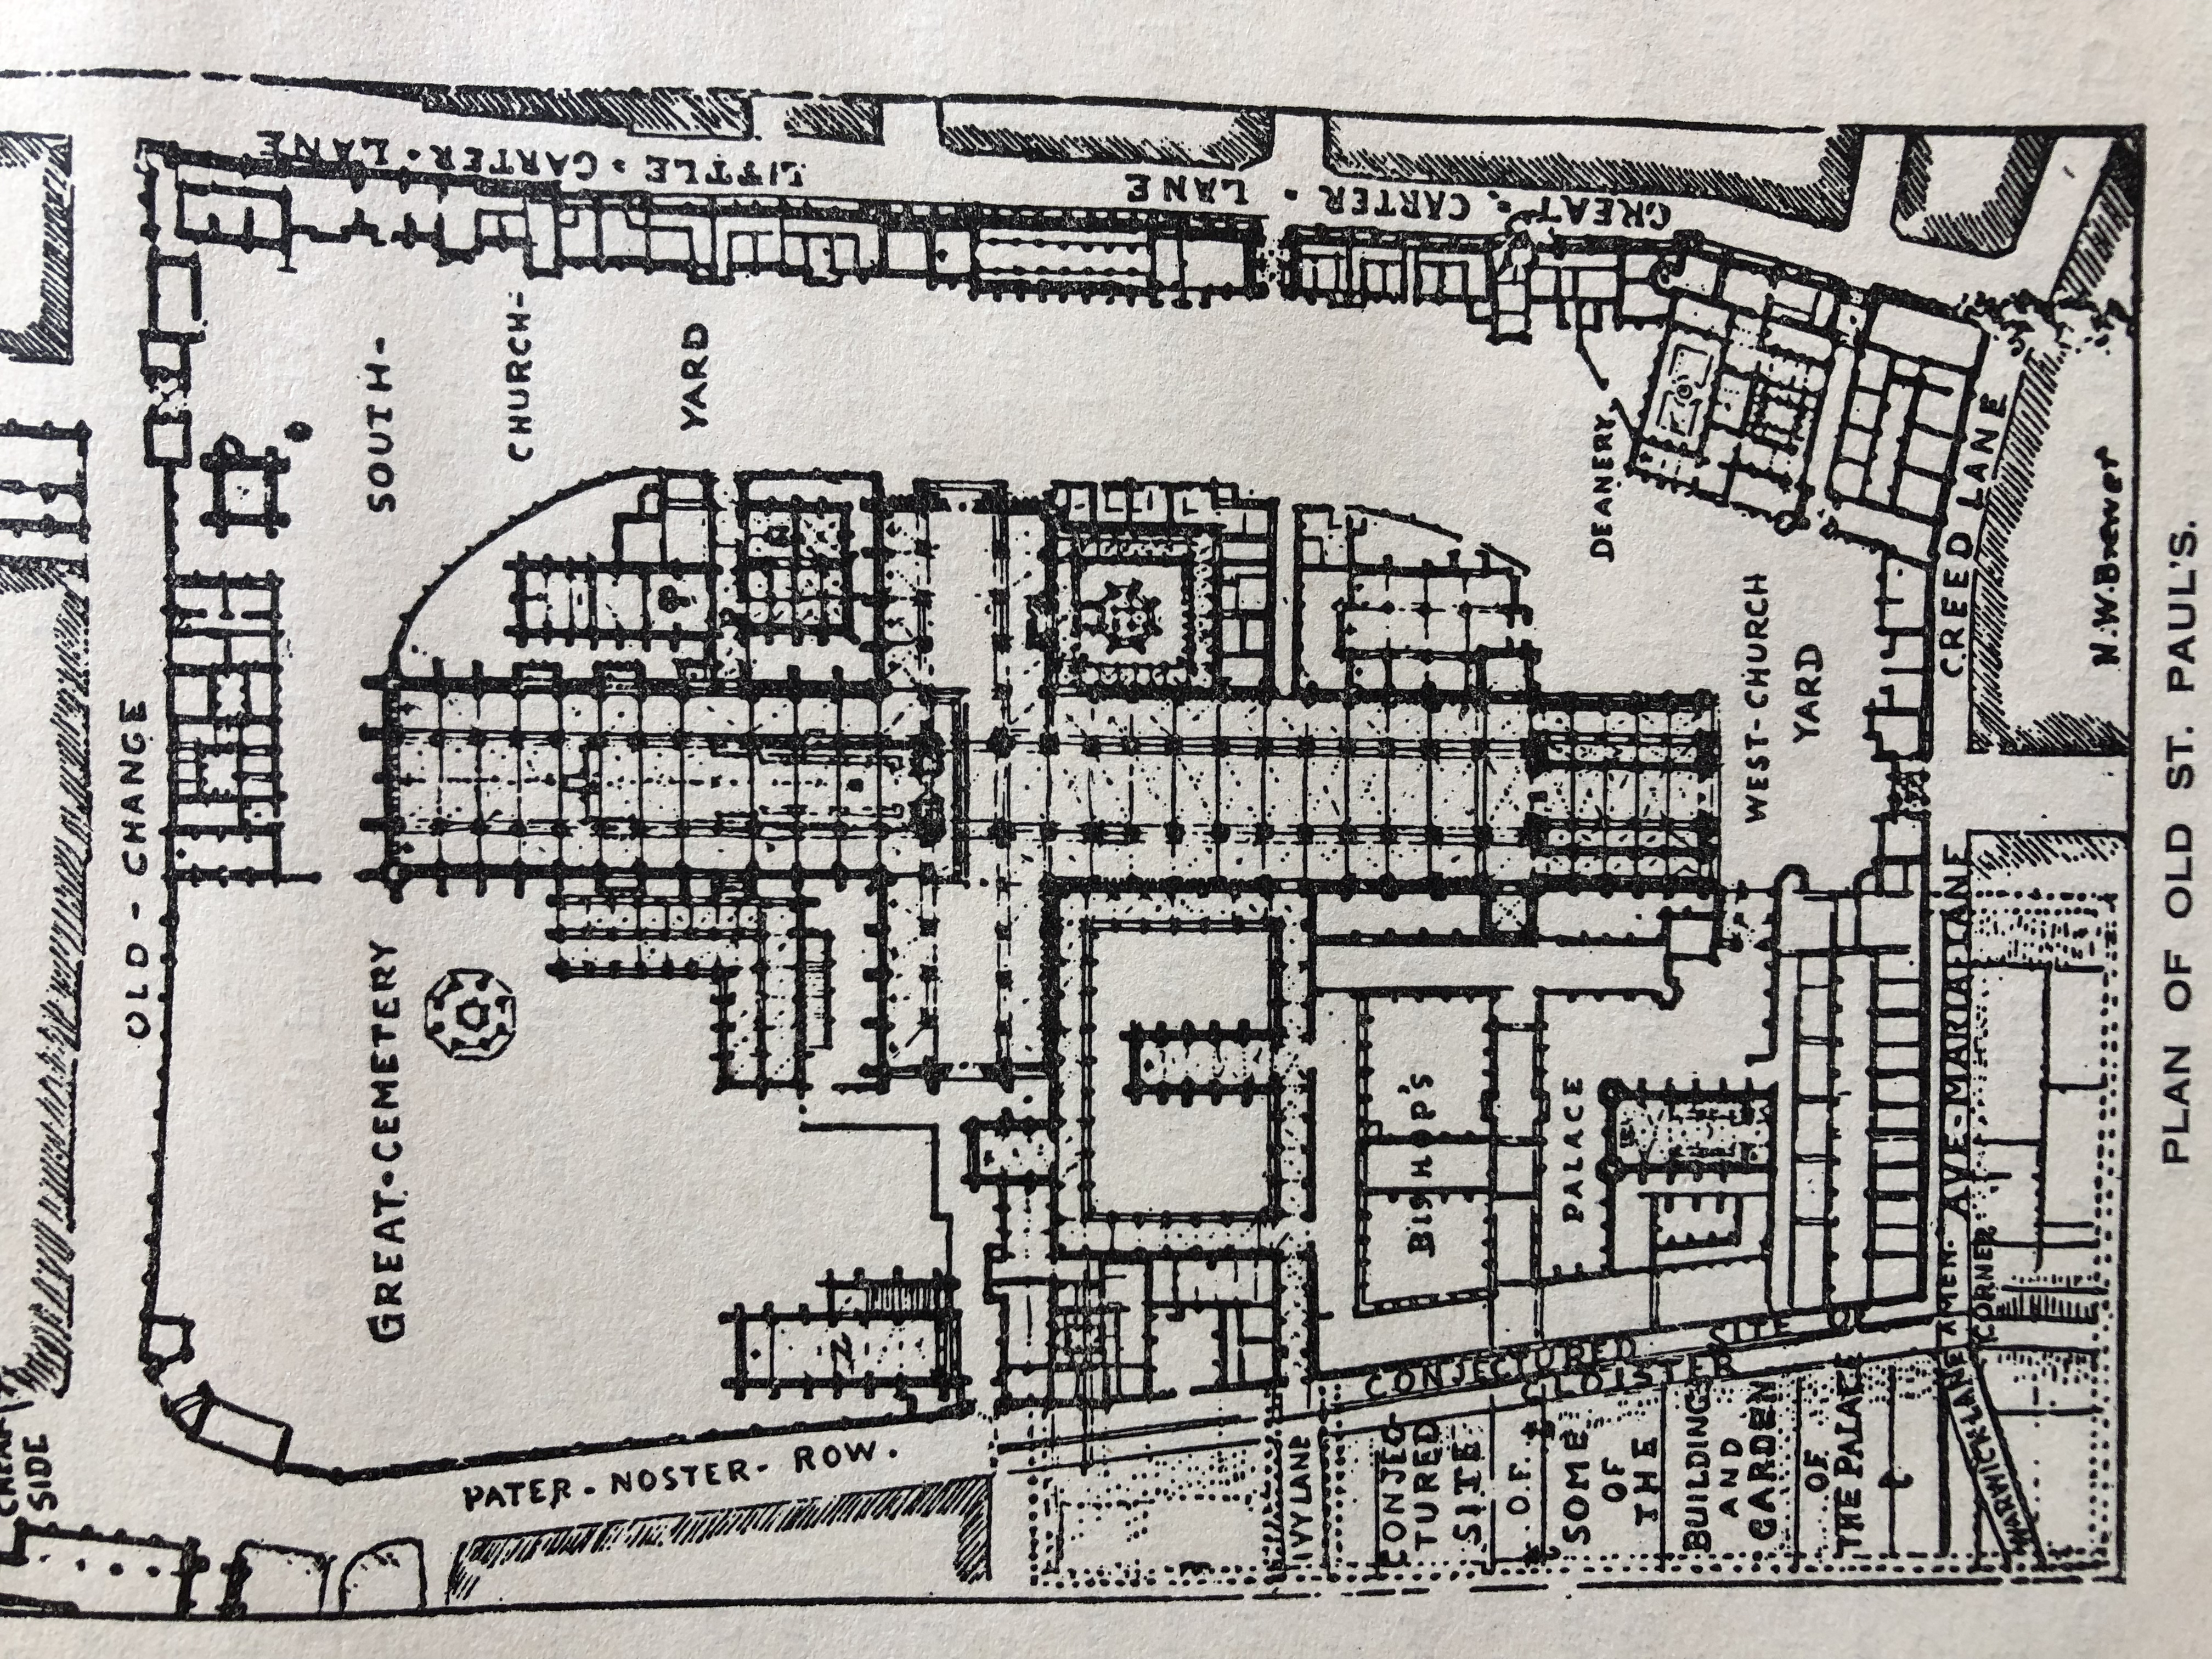 Plan of Old St Paul's showing The Bishop of London's Palace